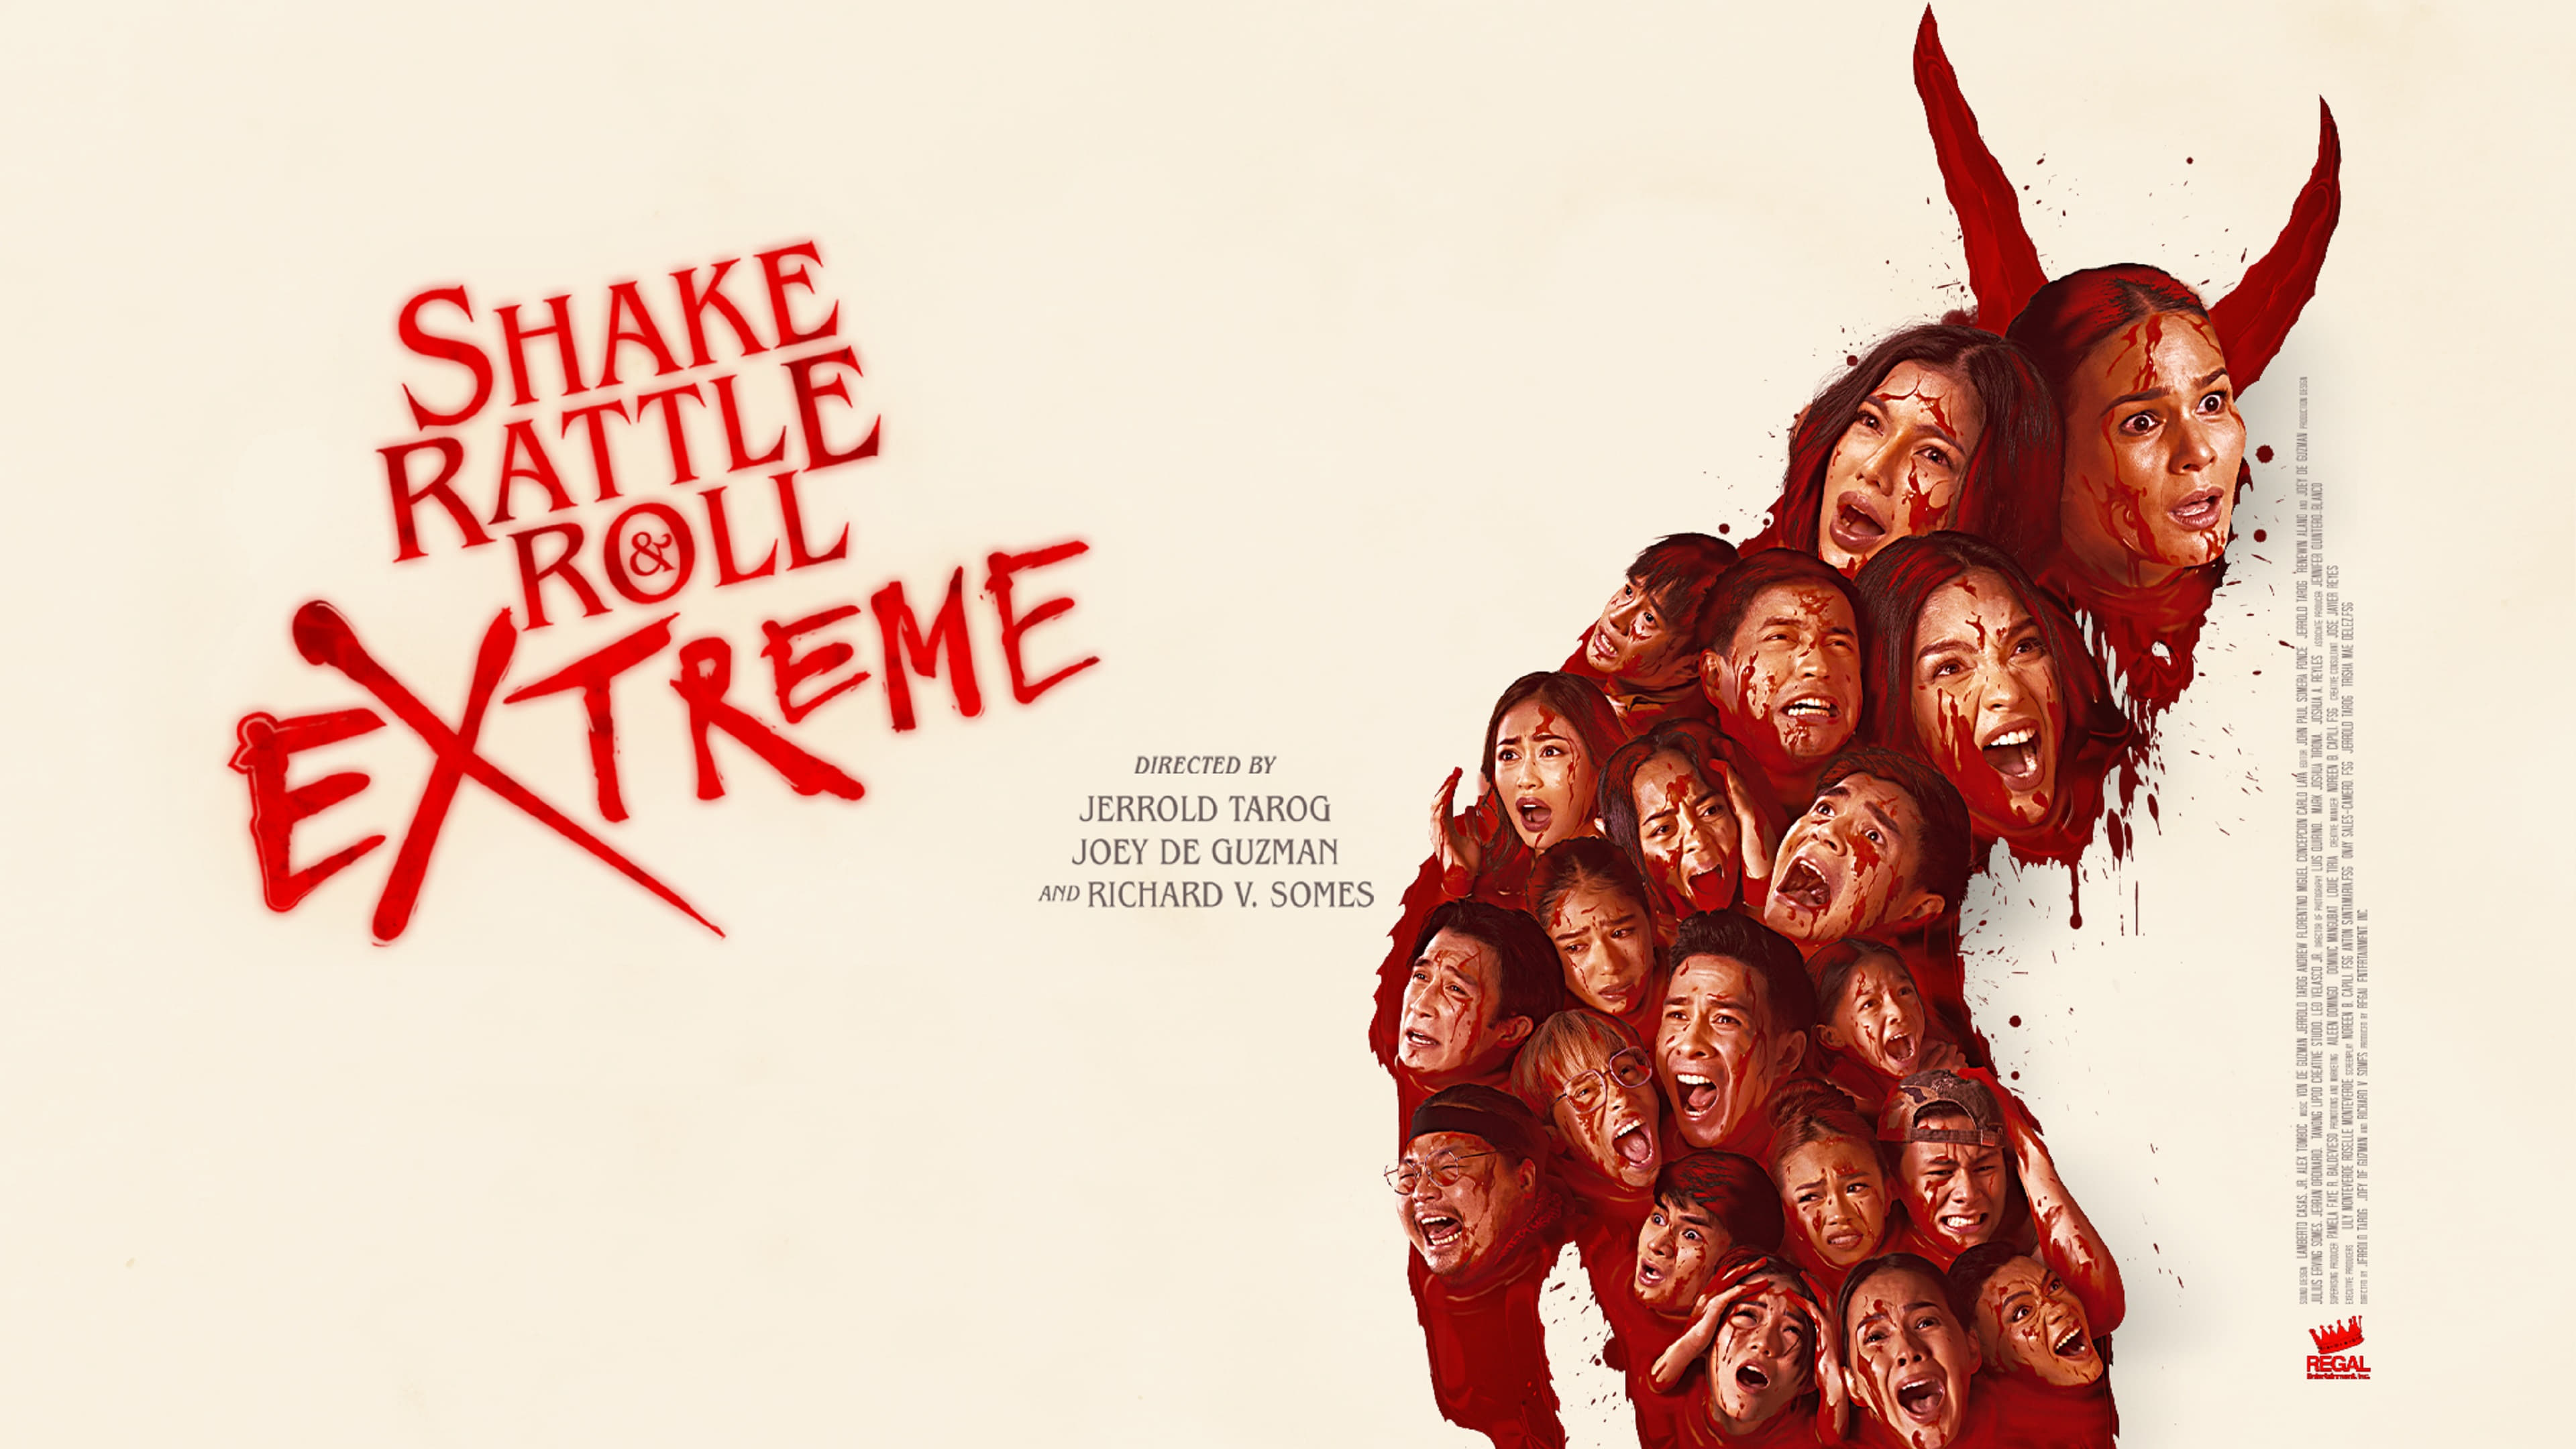 Shake, Rattle And Roll Extreme